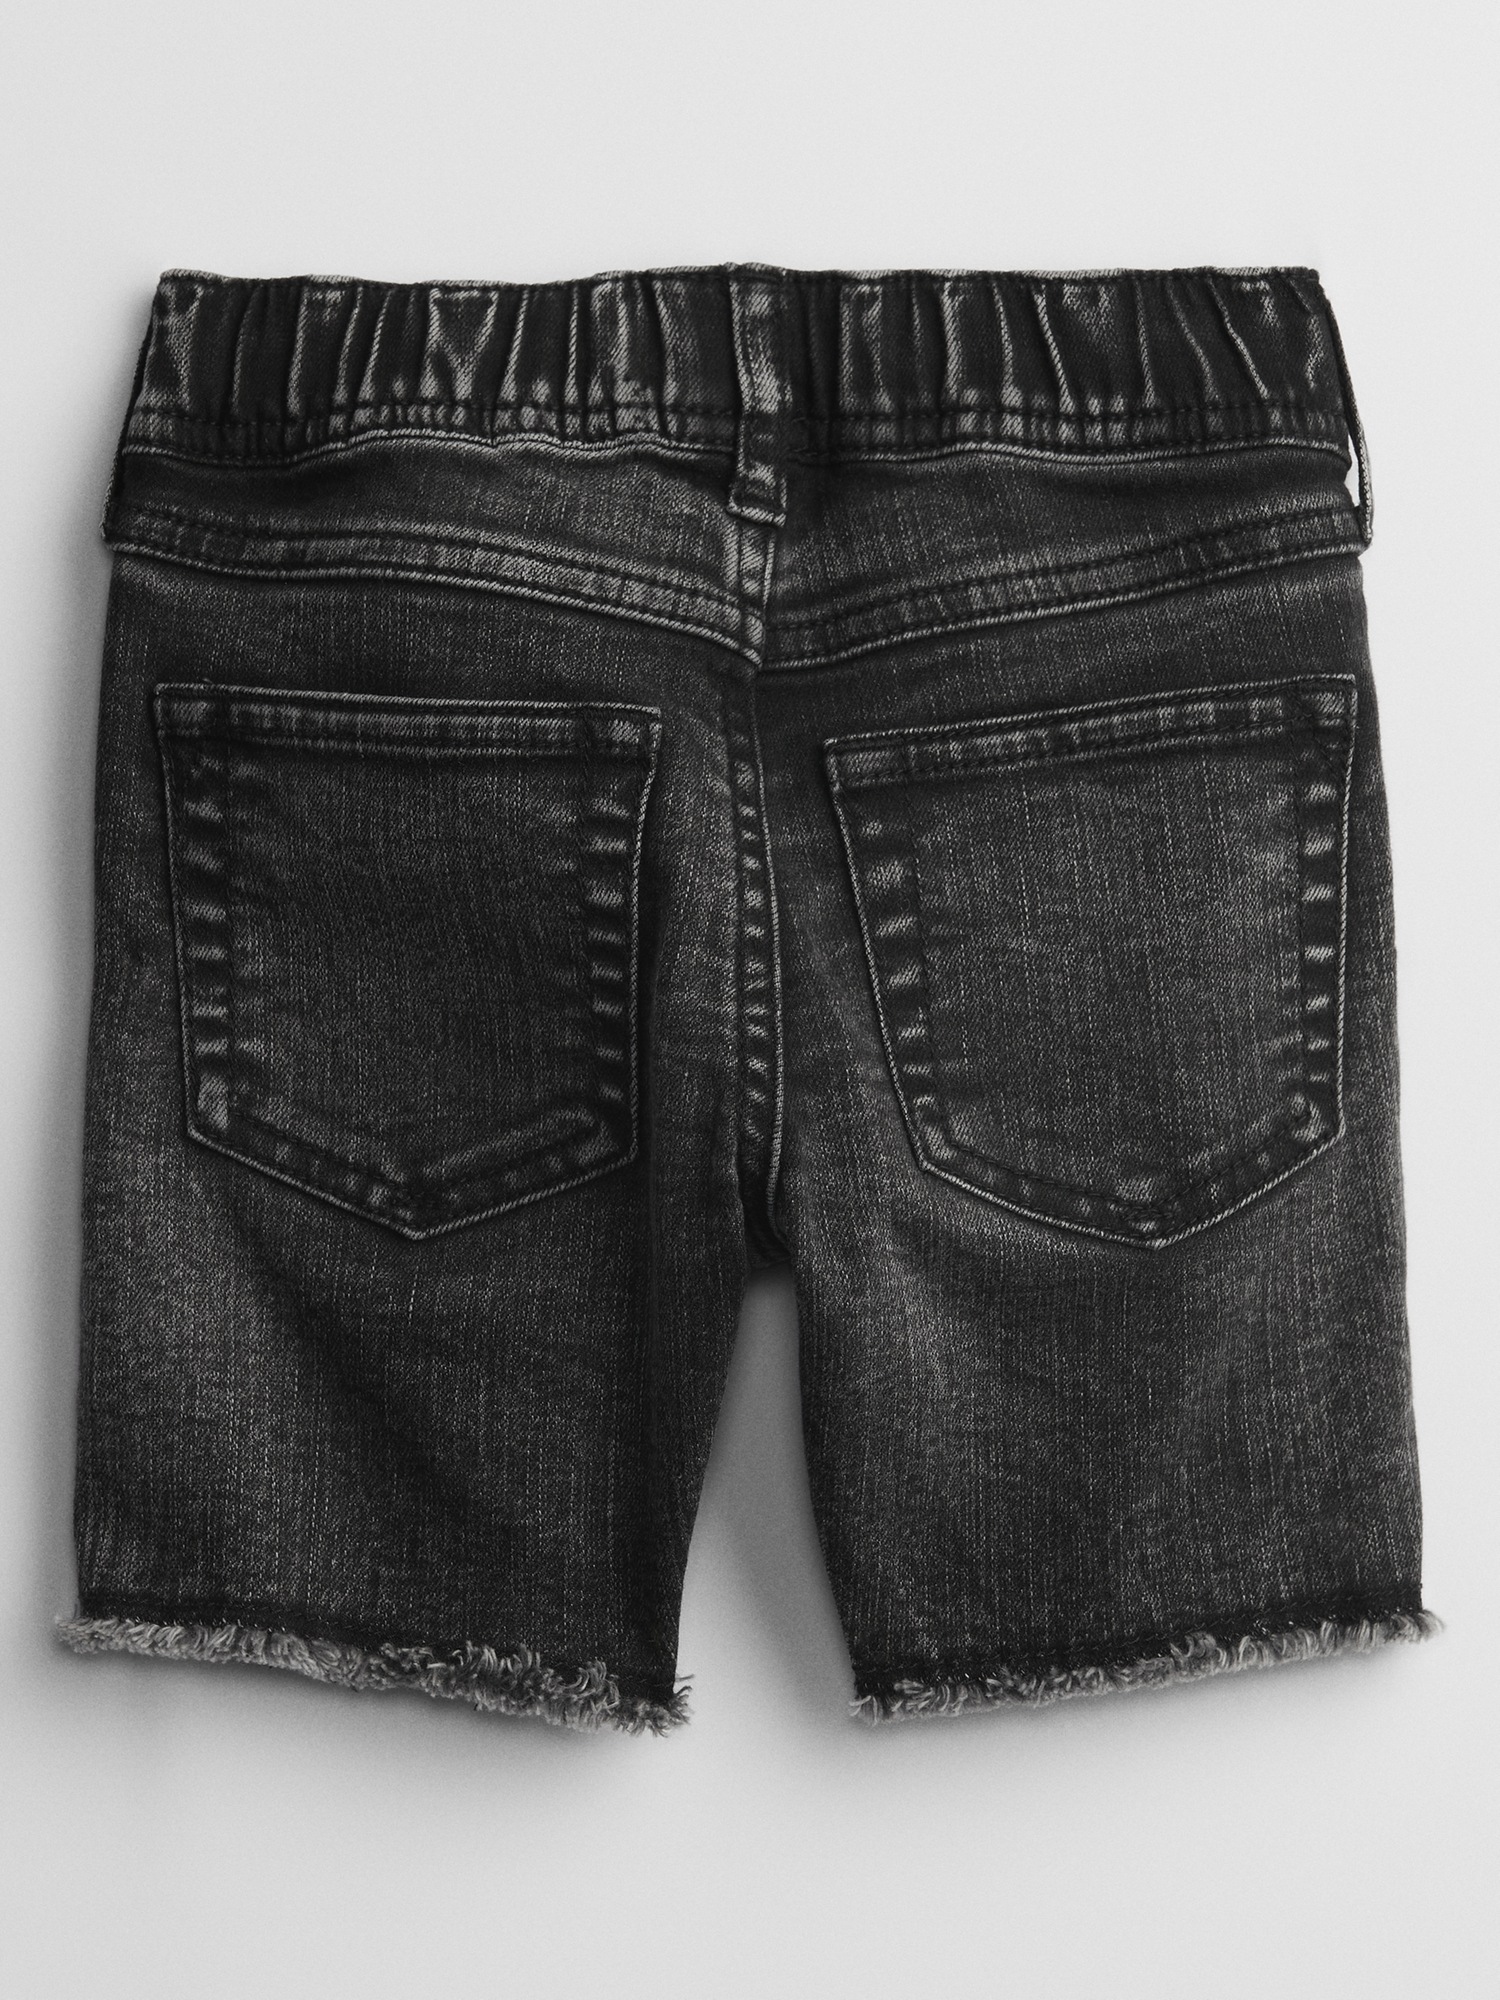 Toddler Denim Pull-On Shorts with Washwell | Gap Factory